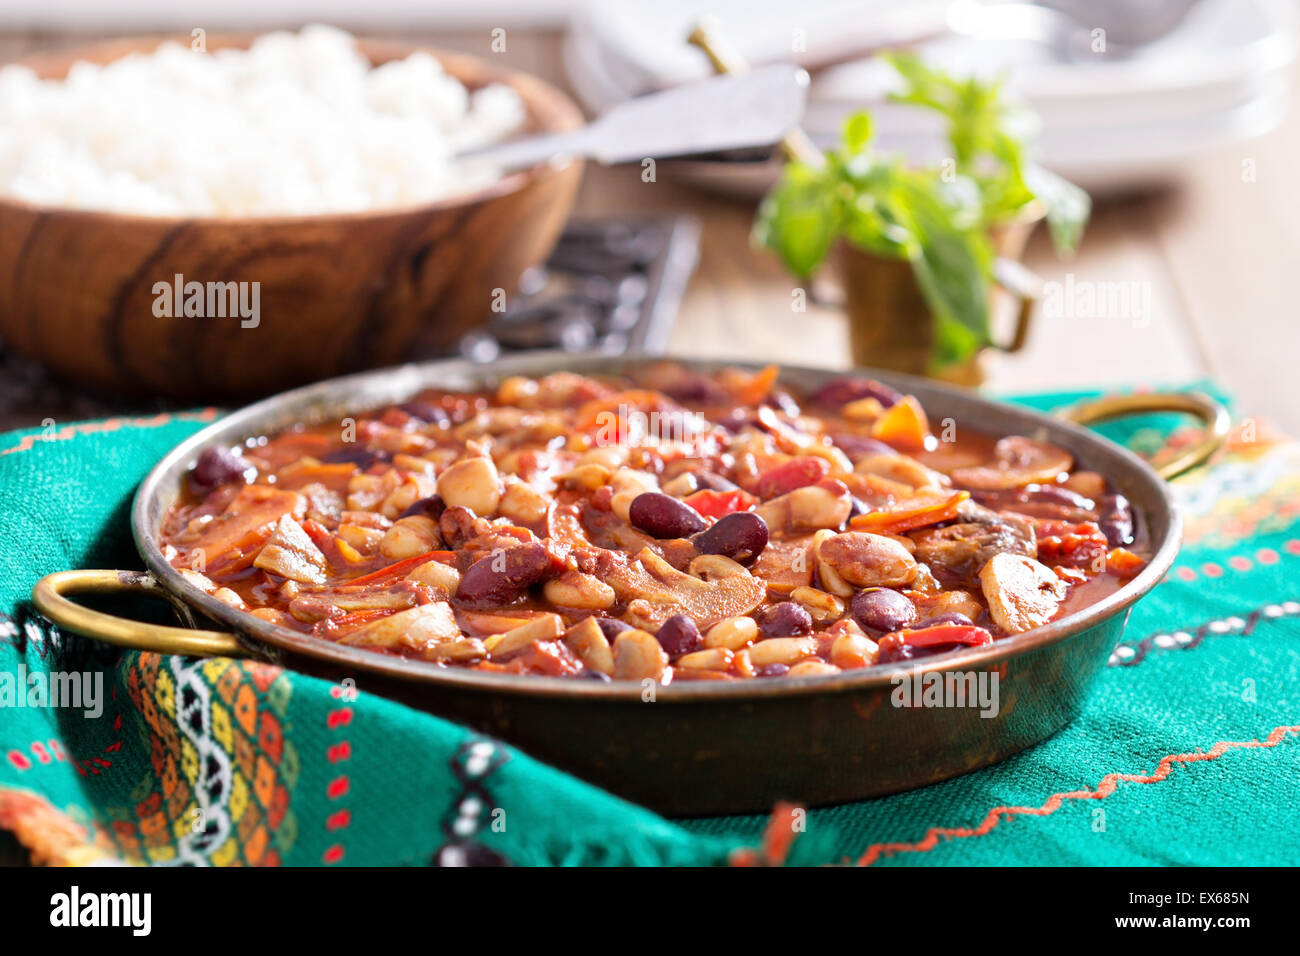 Vegan chili with beans, mushrooms, and vegetables Stock Photo